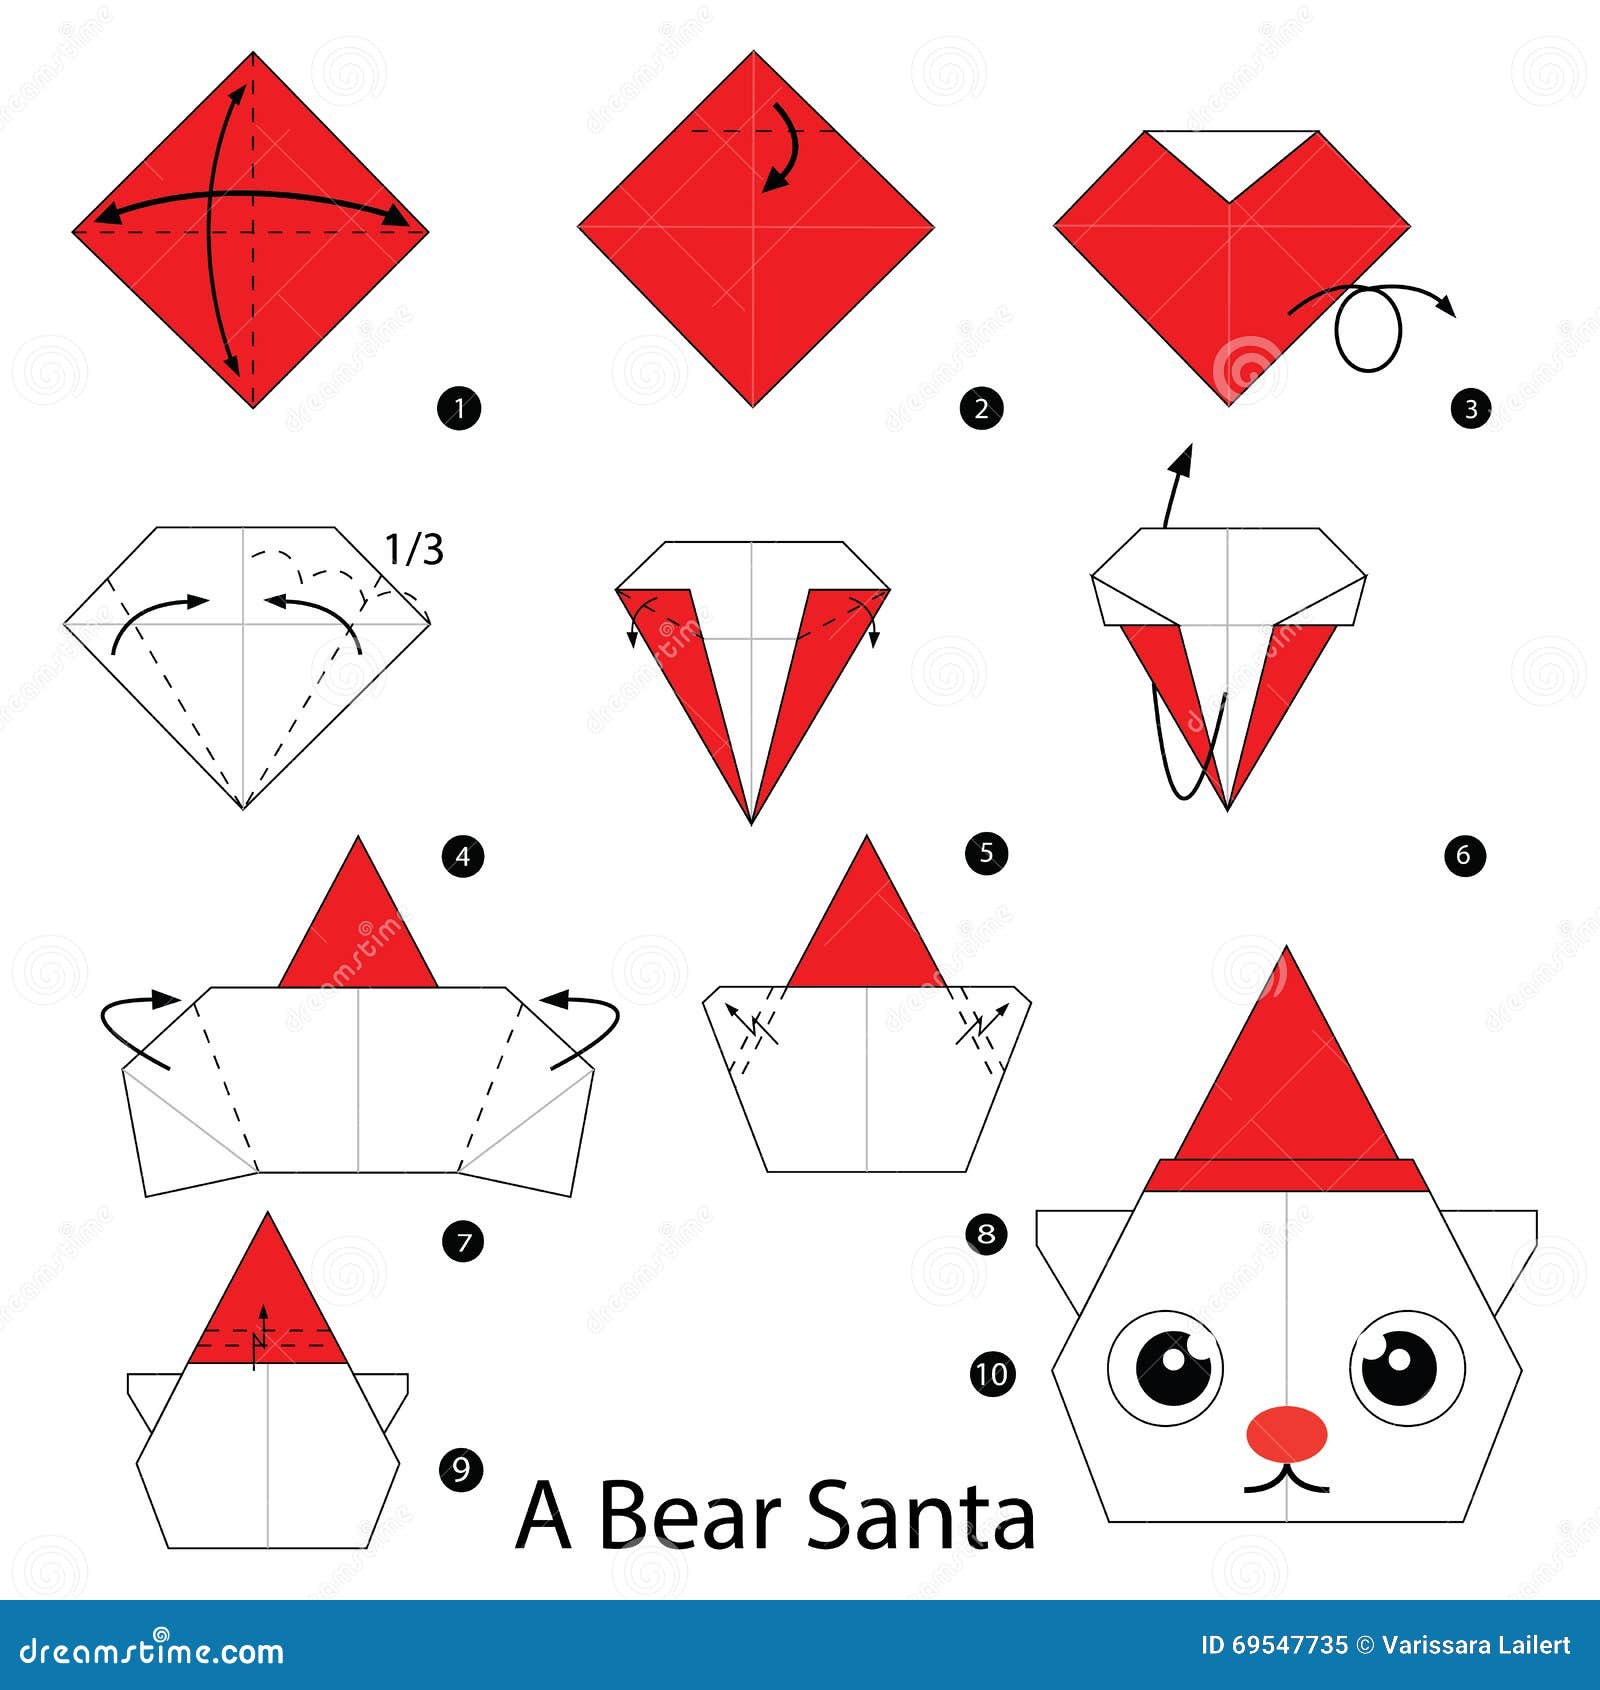 Step By Step Instructions How To Make Origami A Bear Santa 